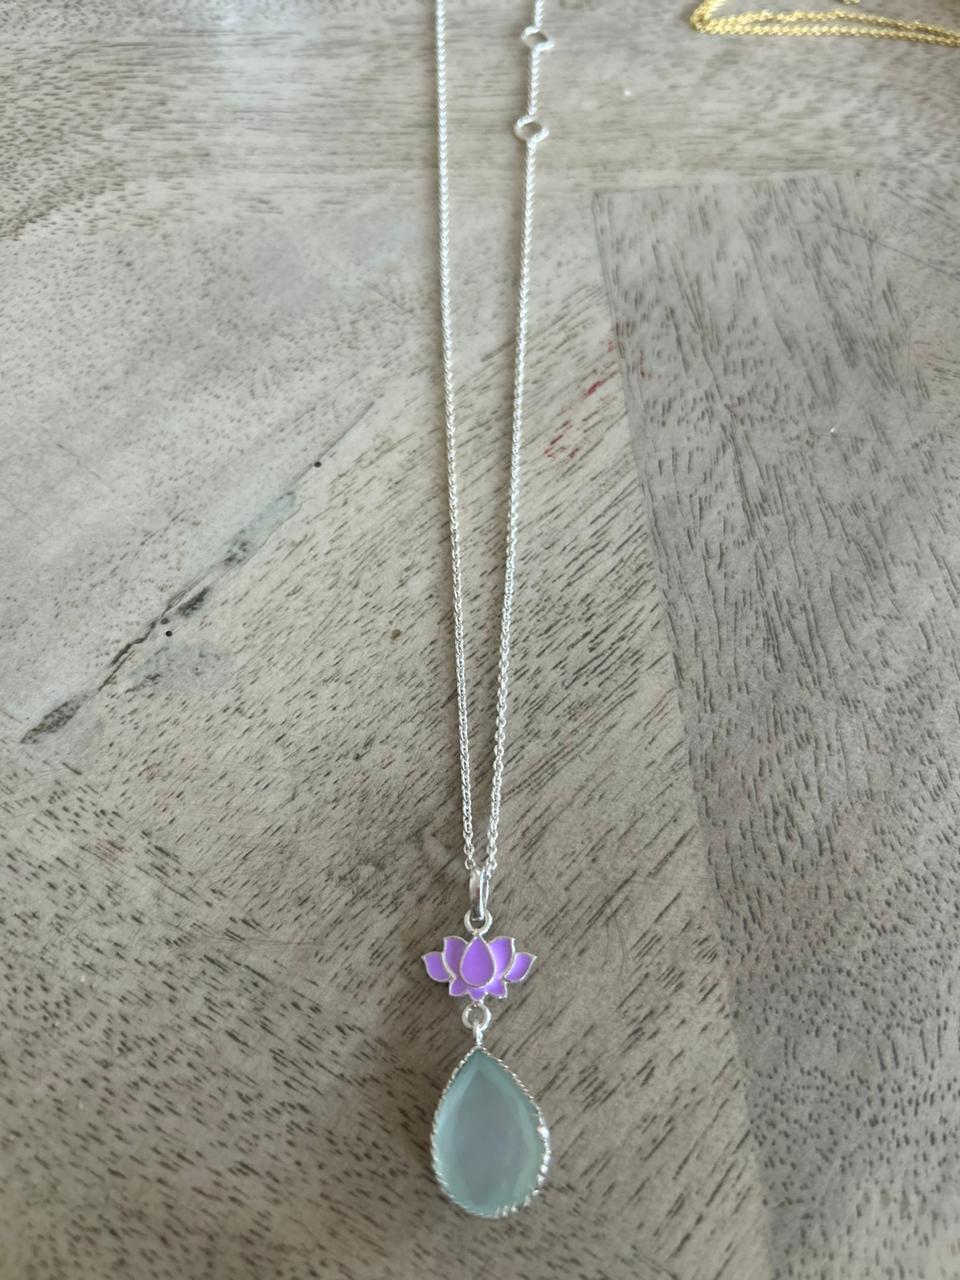 18 inches, Sterling silver, Lotus pendant, Aqua chalcydony stone with lilac enamel.